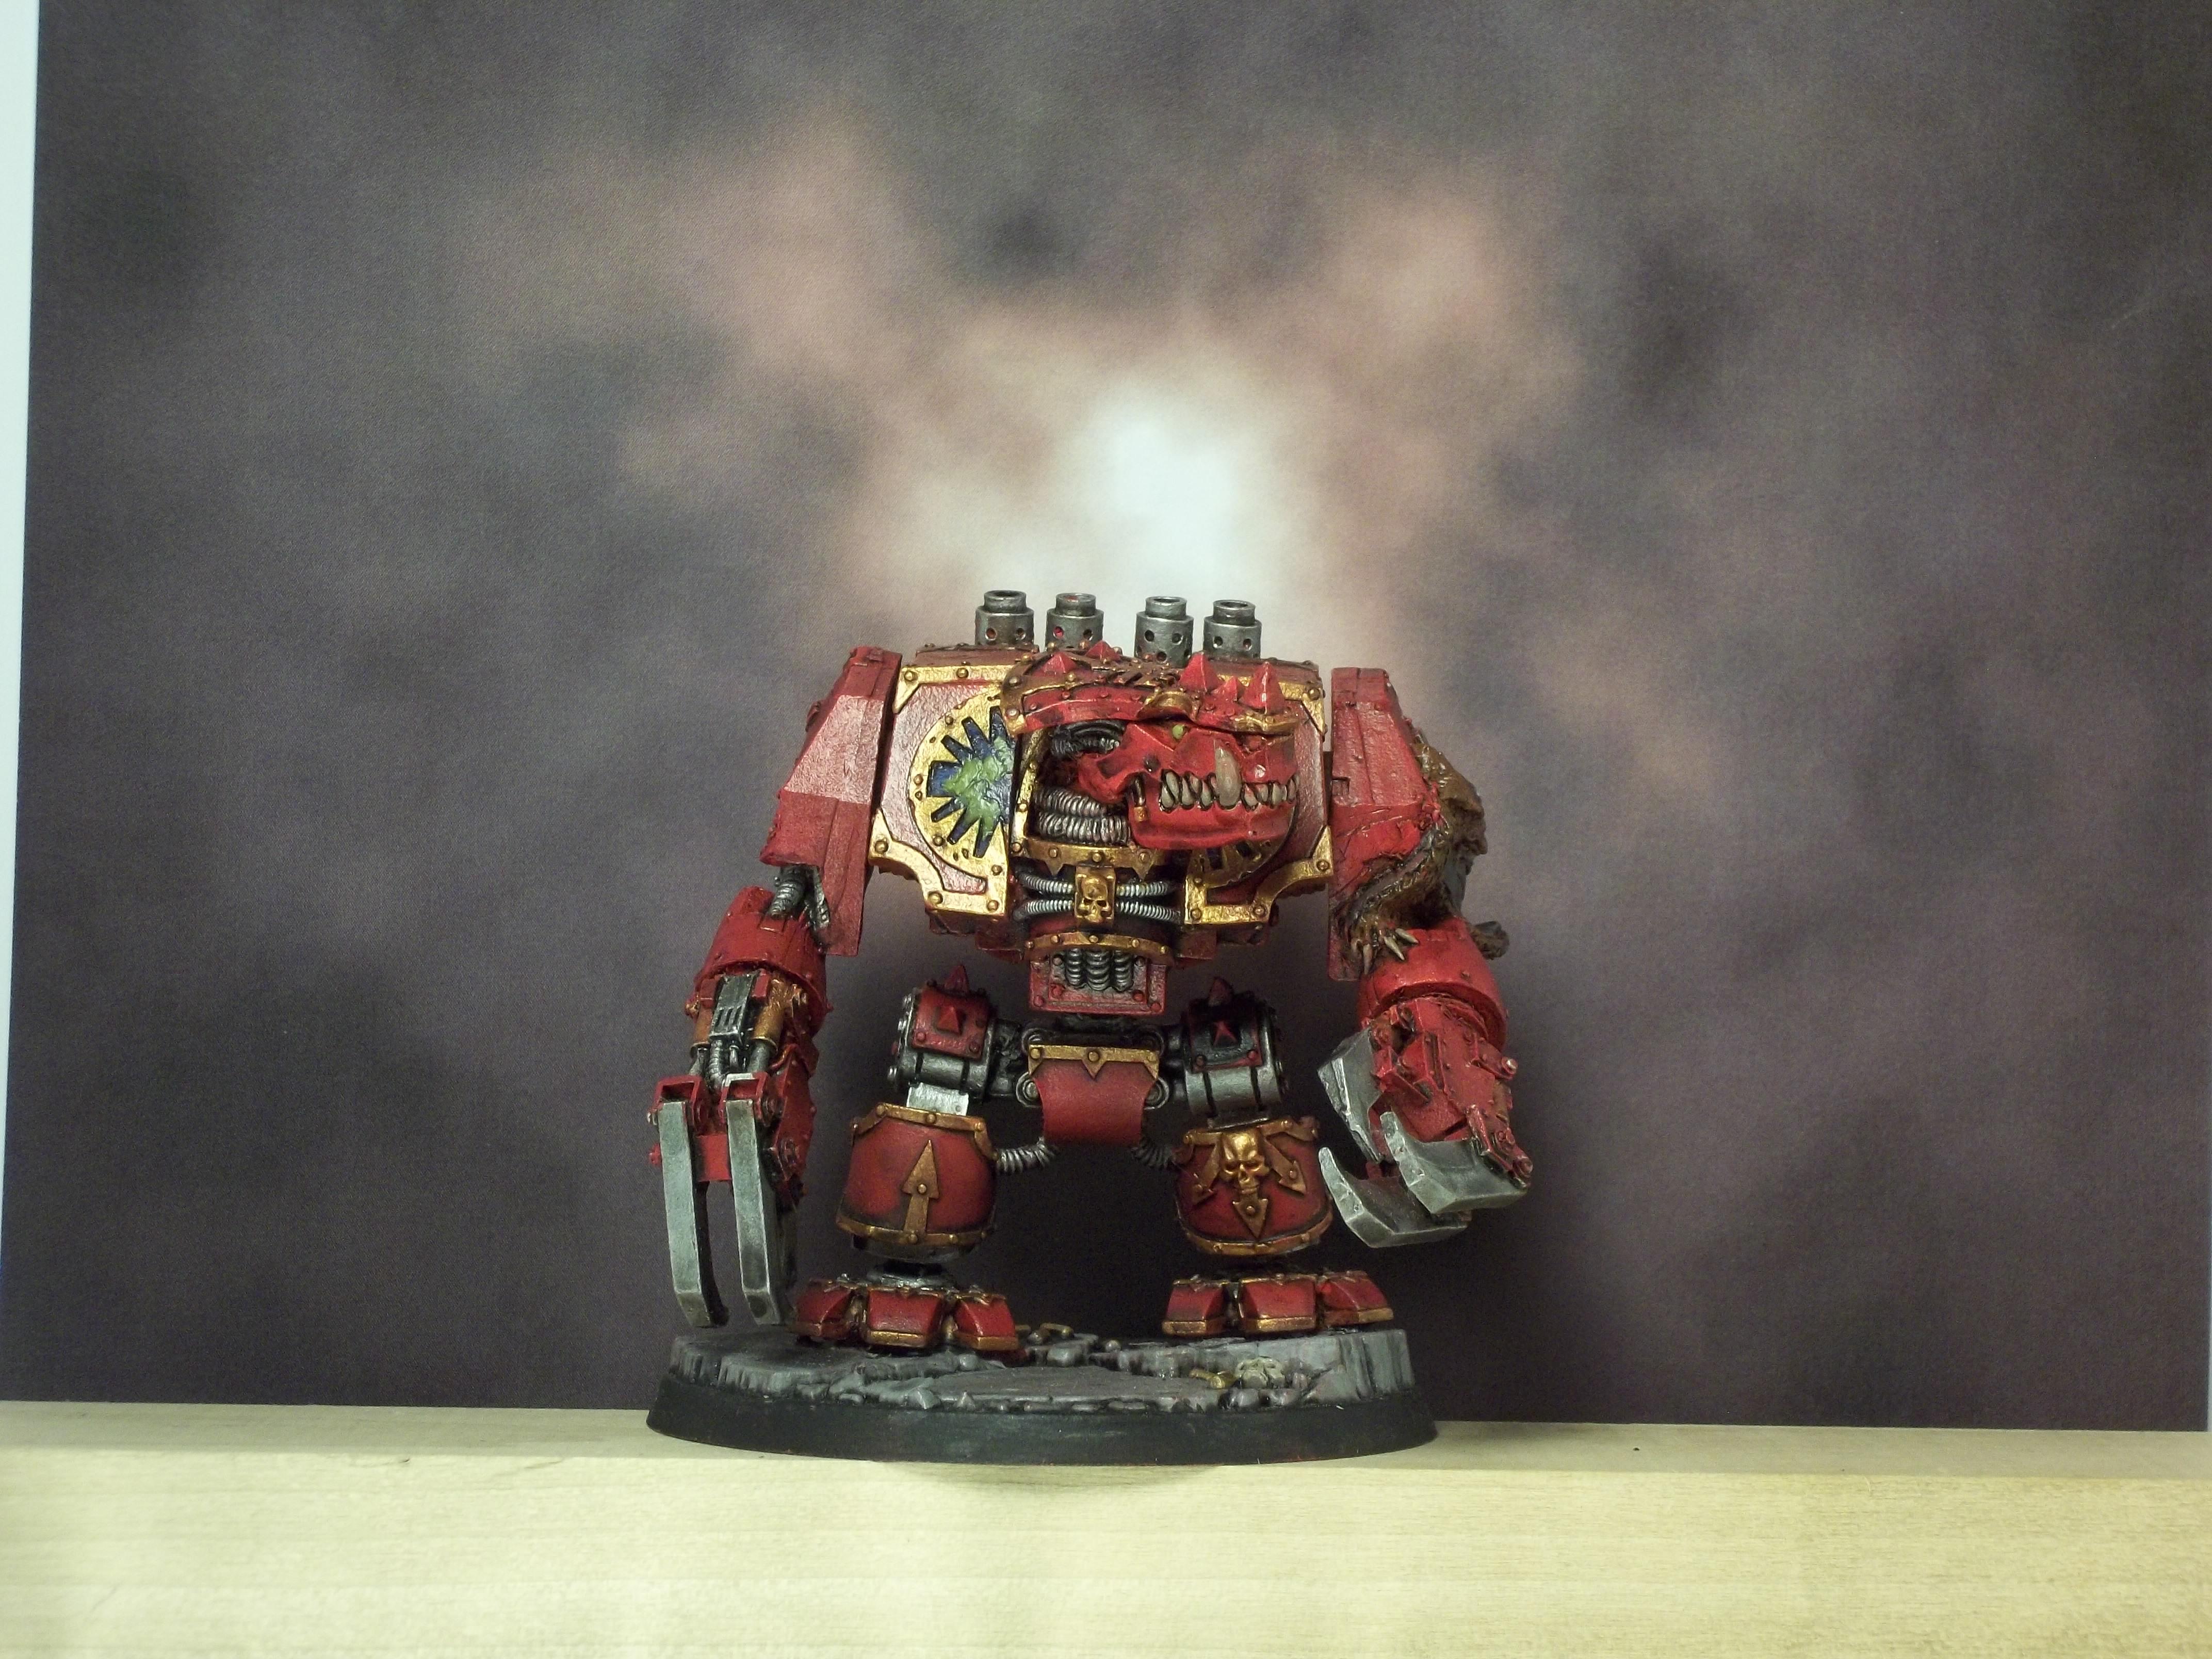 World Eaters Dreadnought